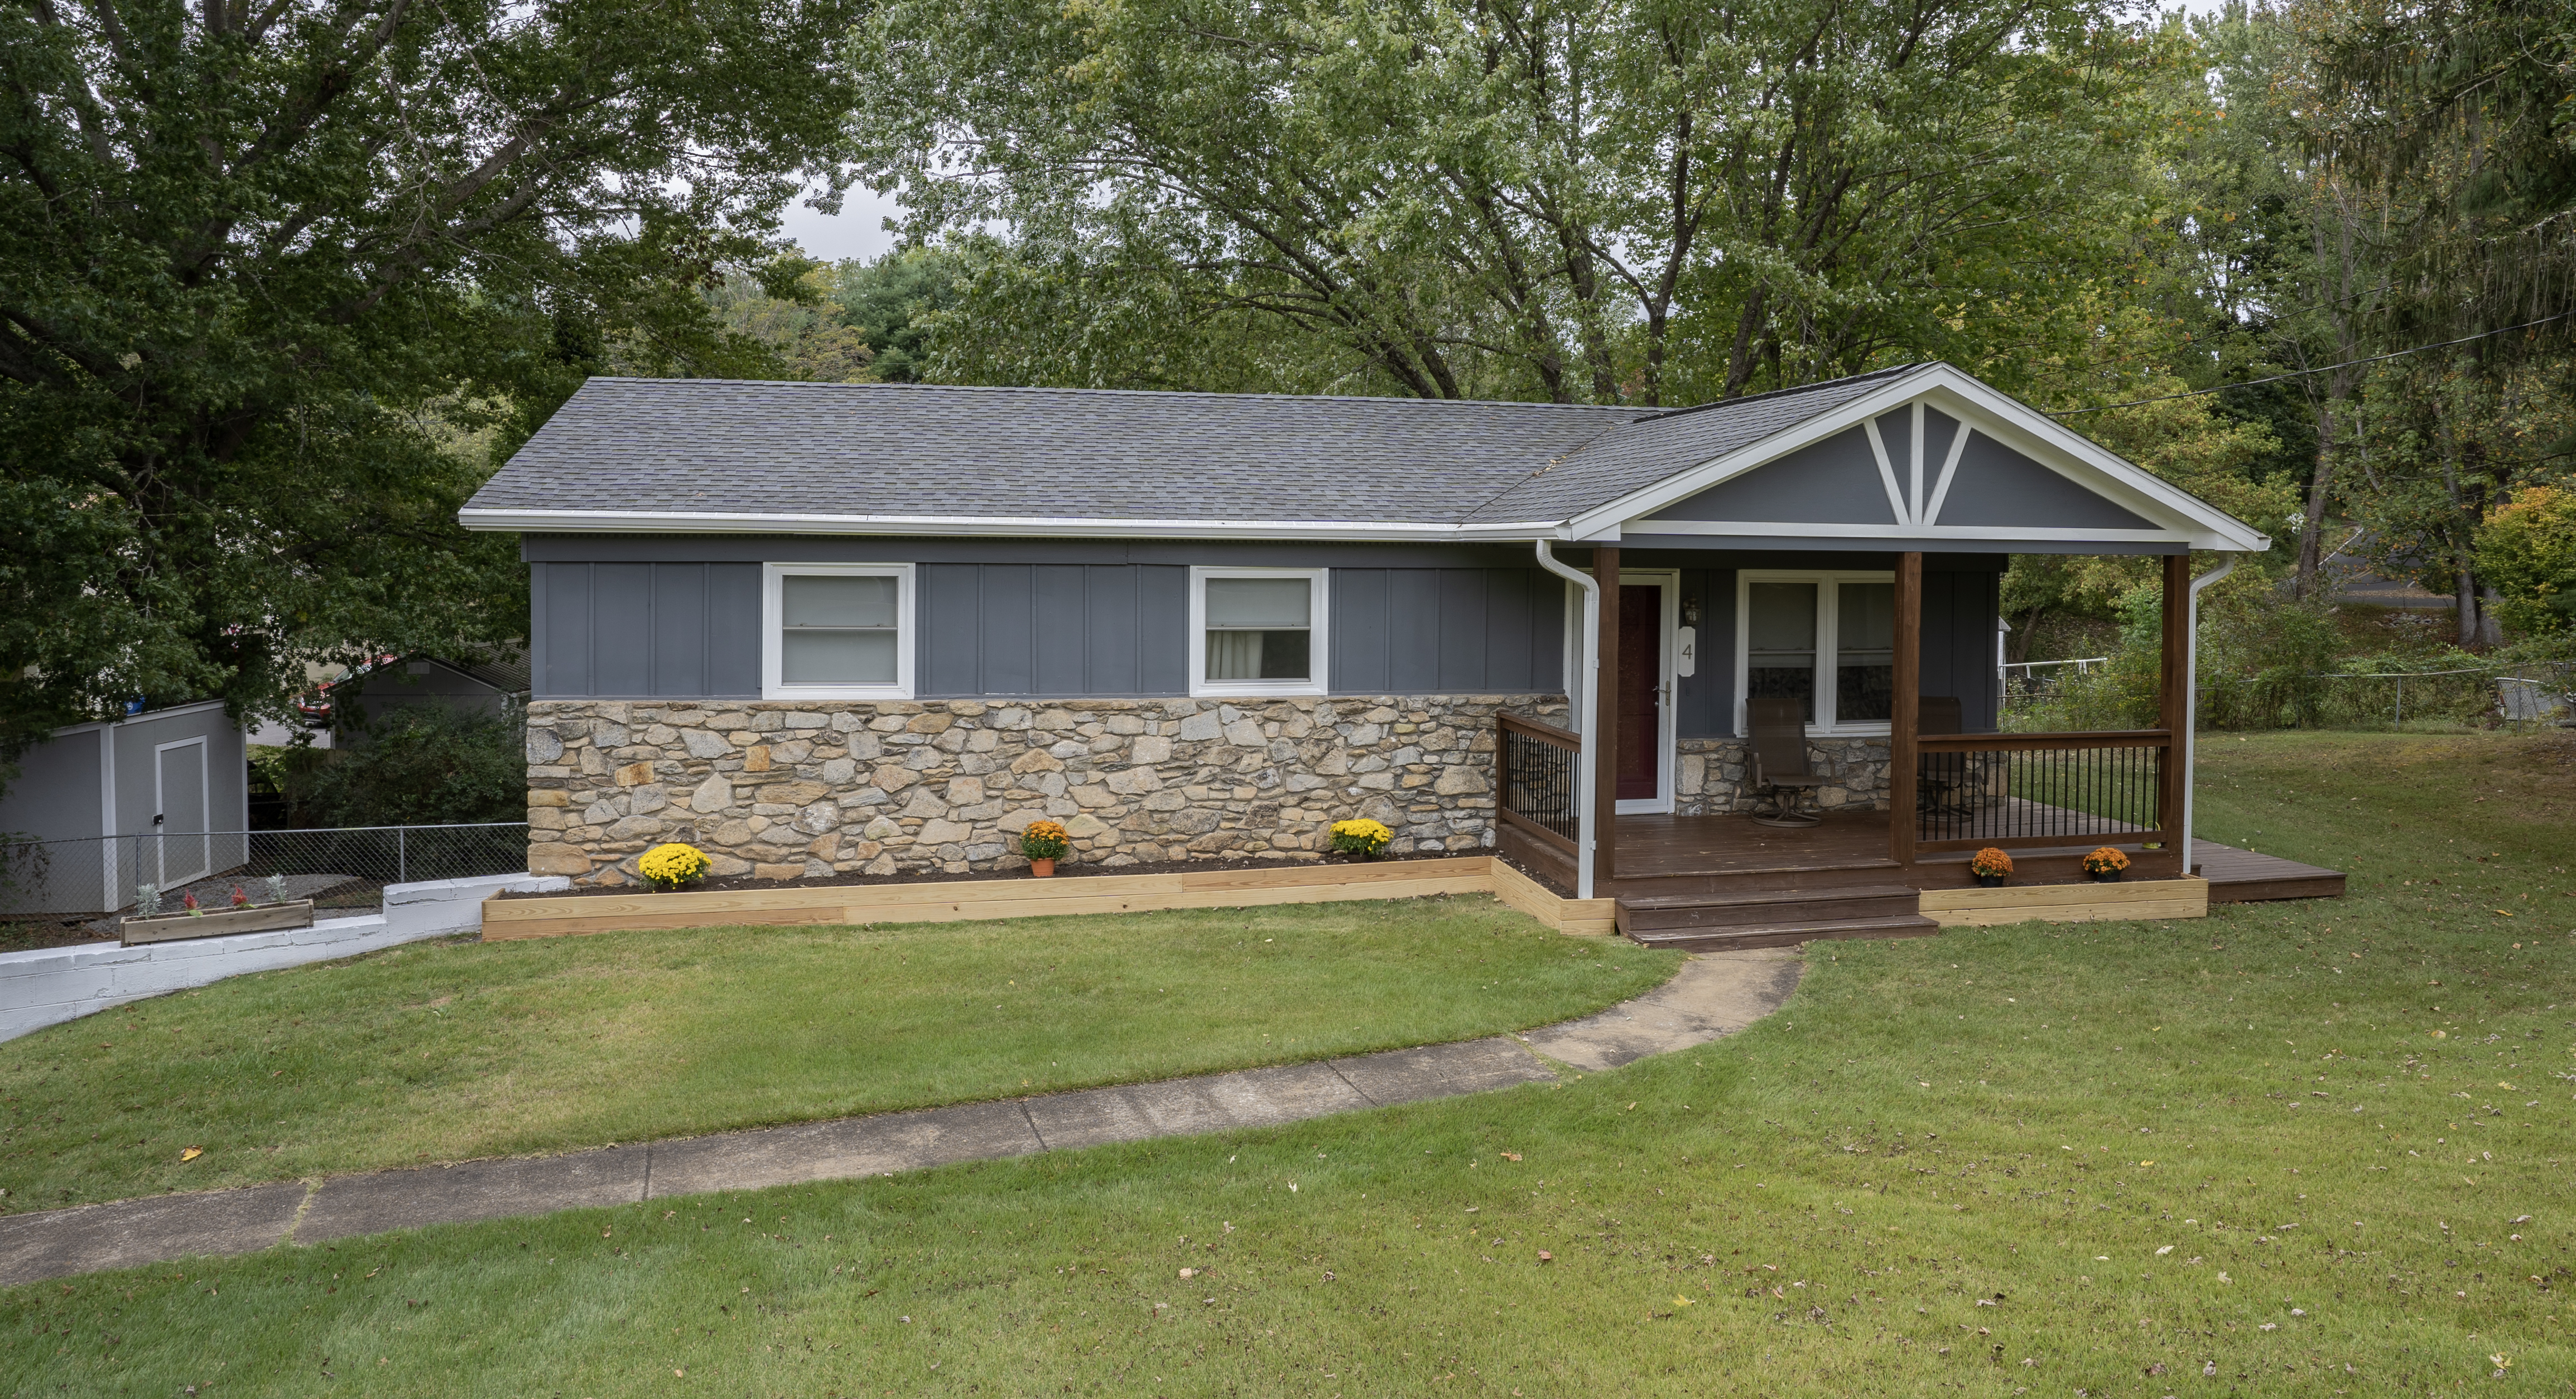 SOLD! 4 Cub Road, Asheville, NC 28806